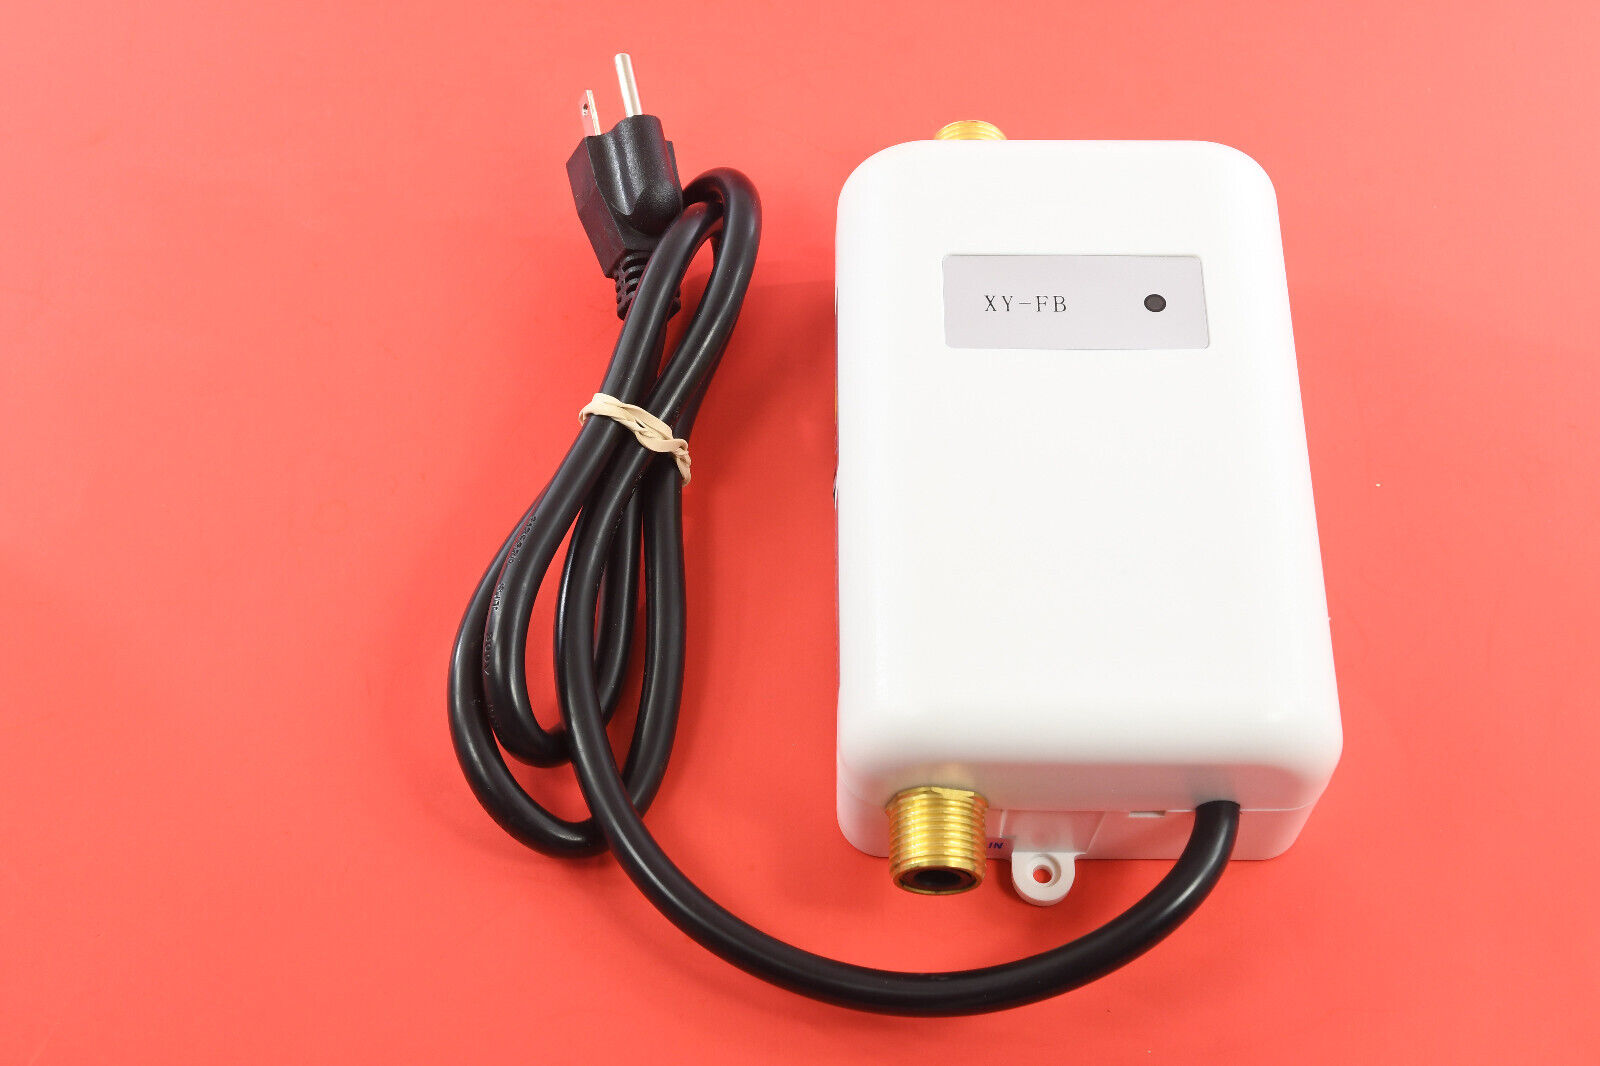 Xinye XY-FB Compact Thermostatic Water Heater Tankless Induction